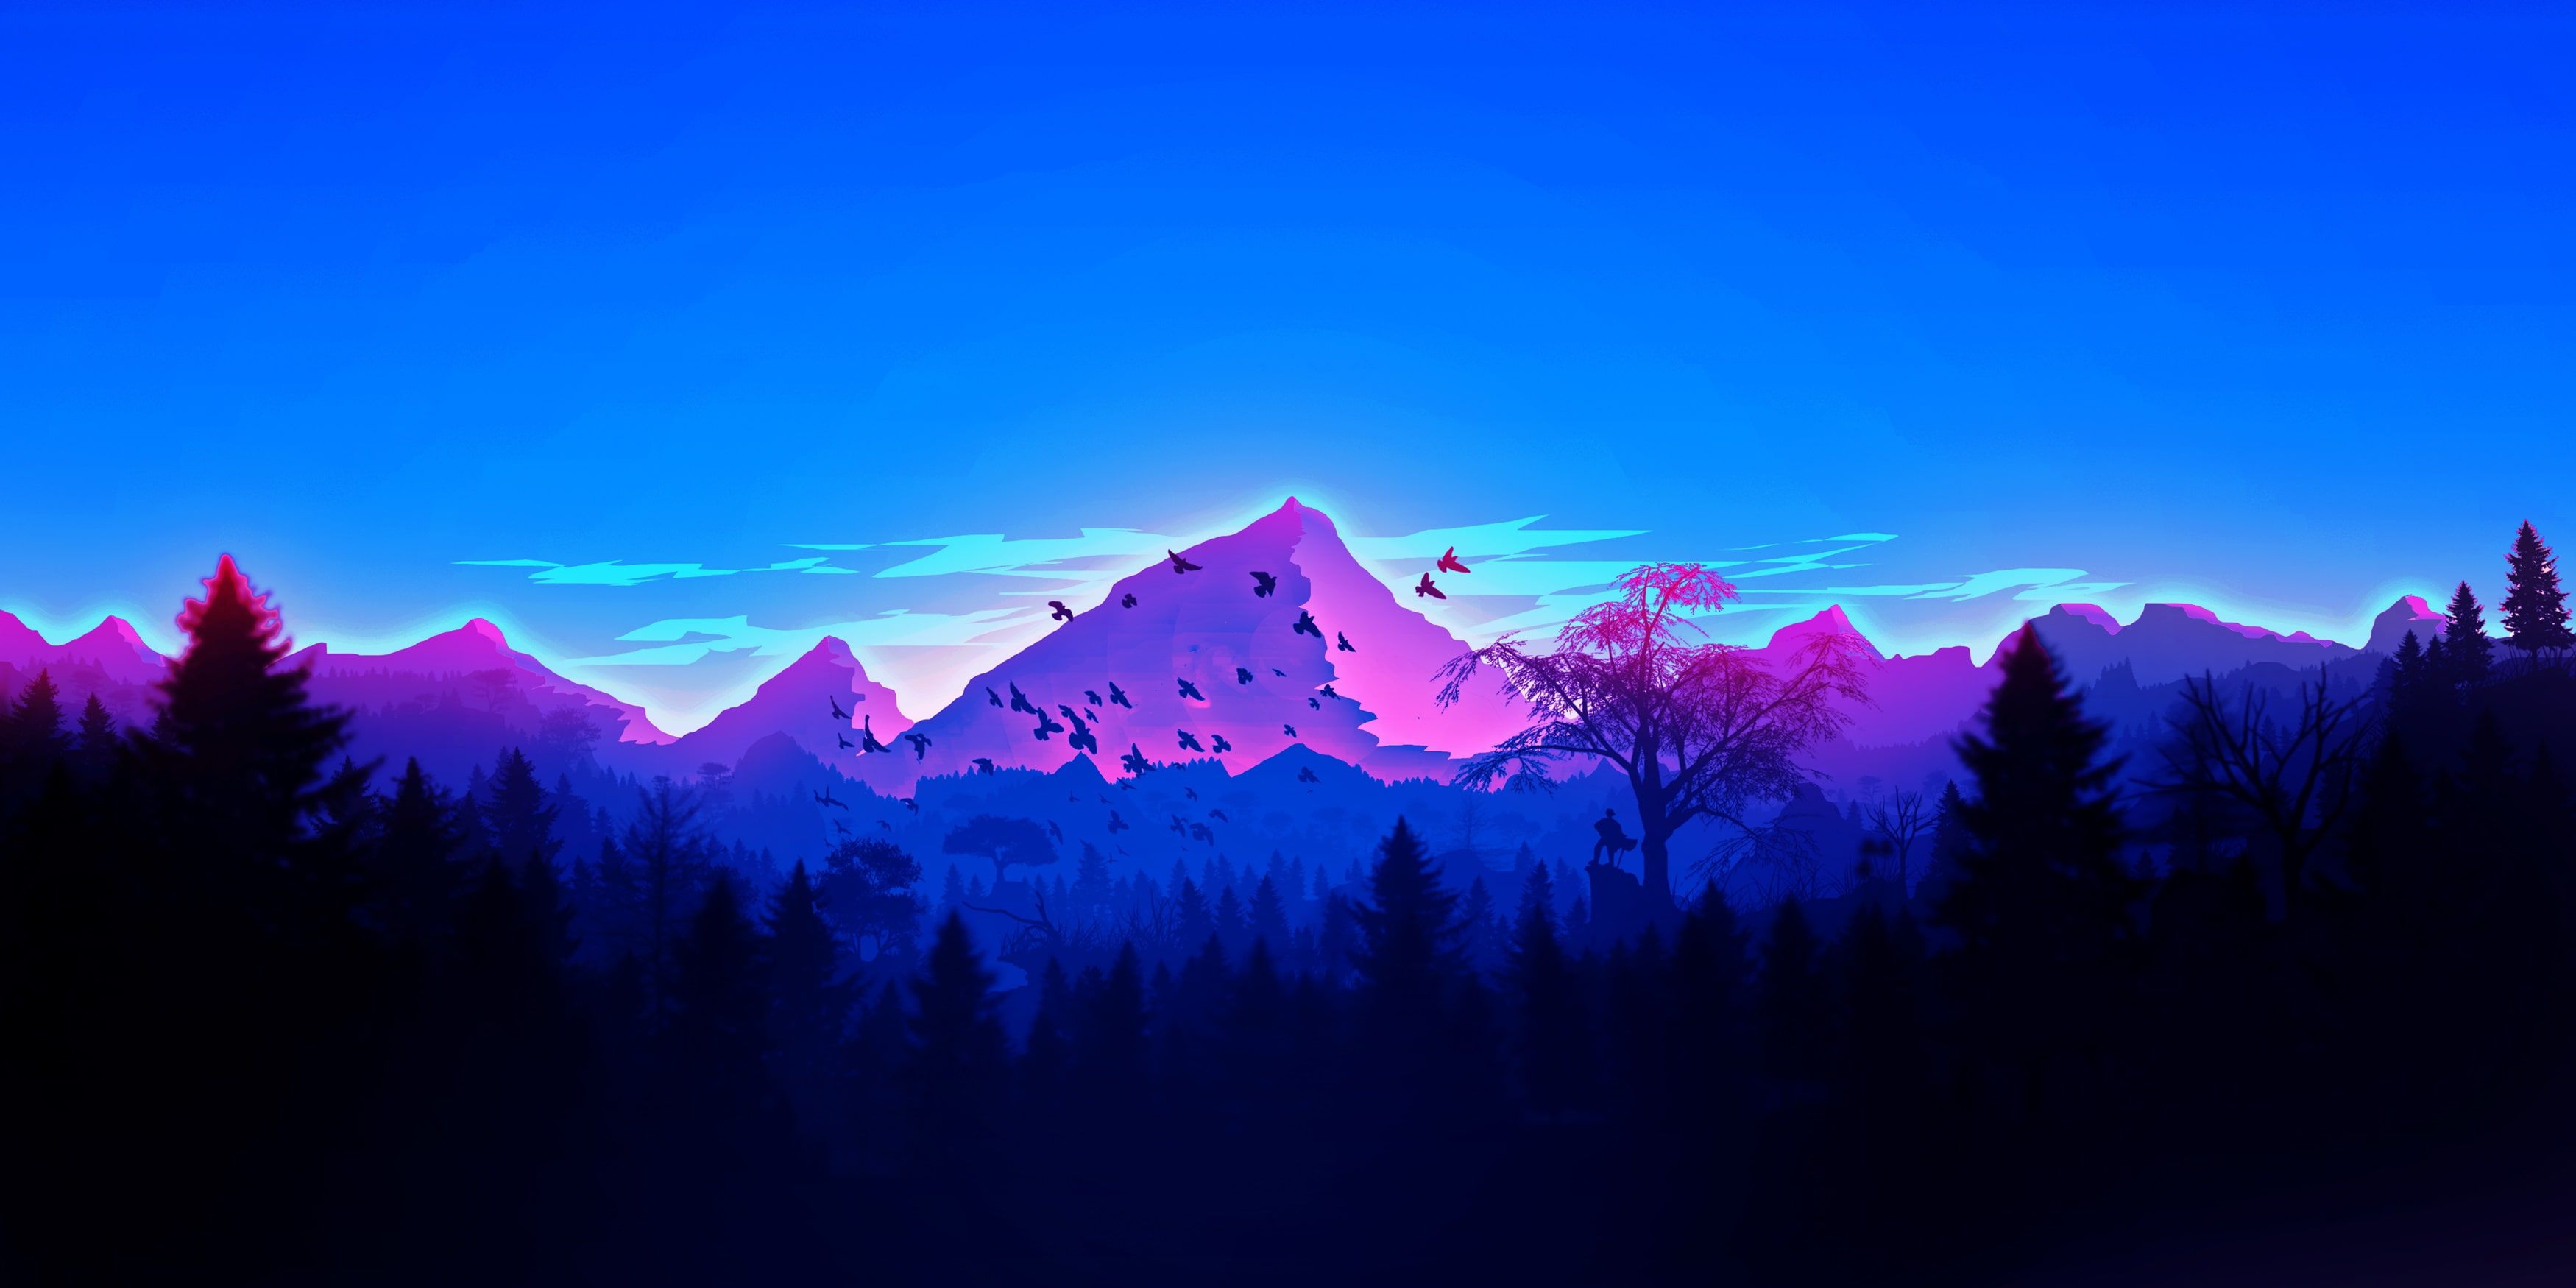 A pink and blue gradient image of a mountain range with trees in the foreground - Mountain